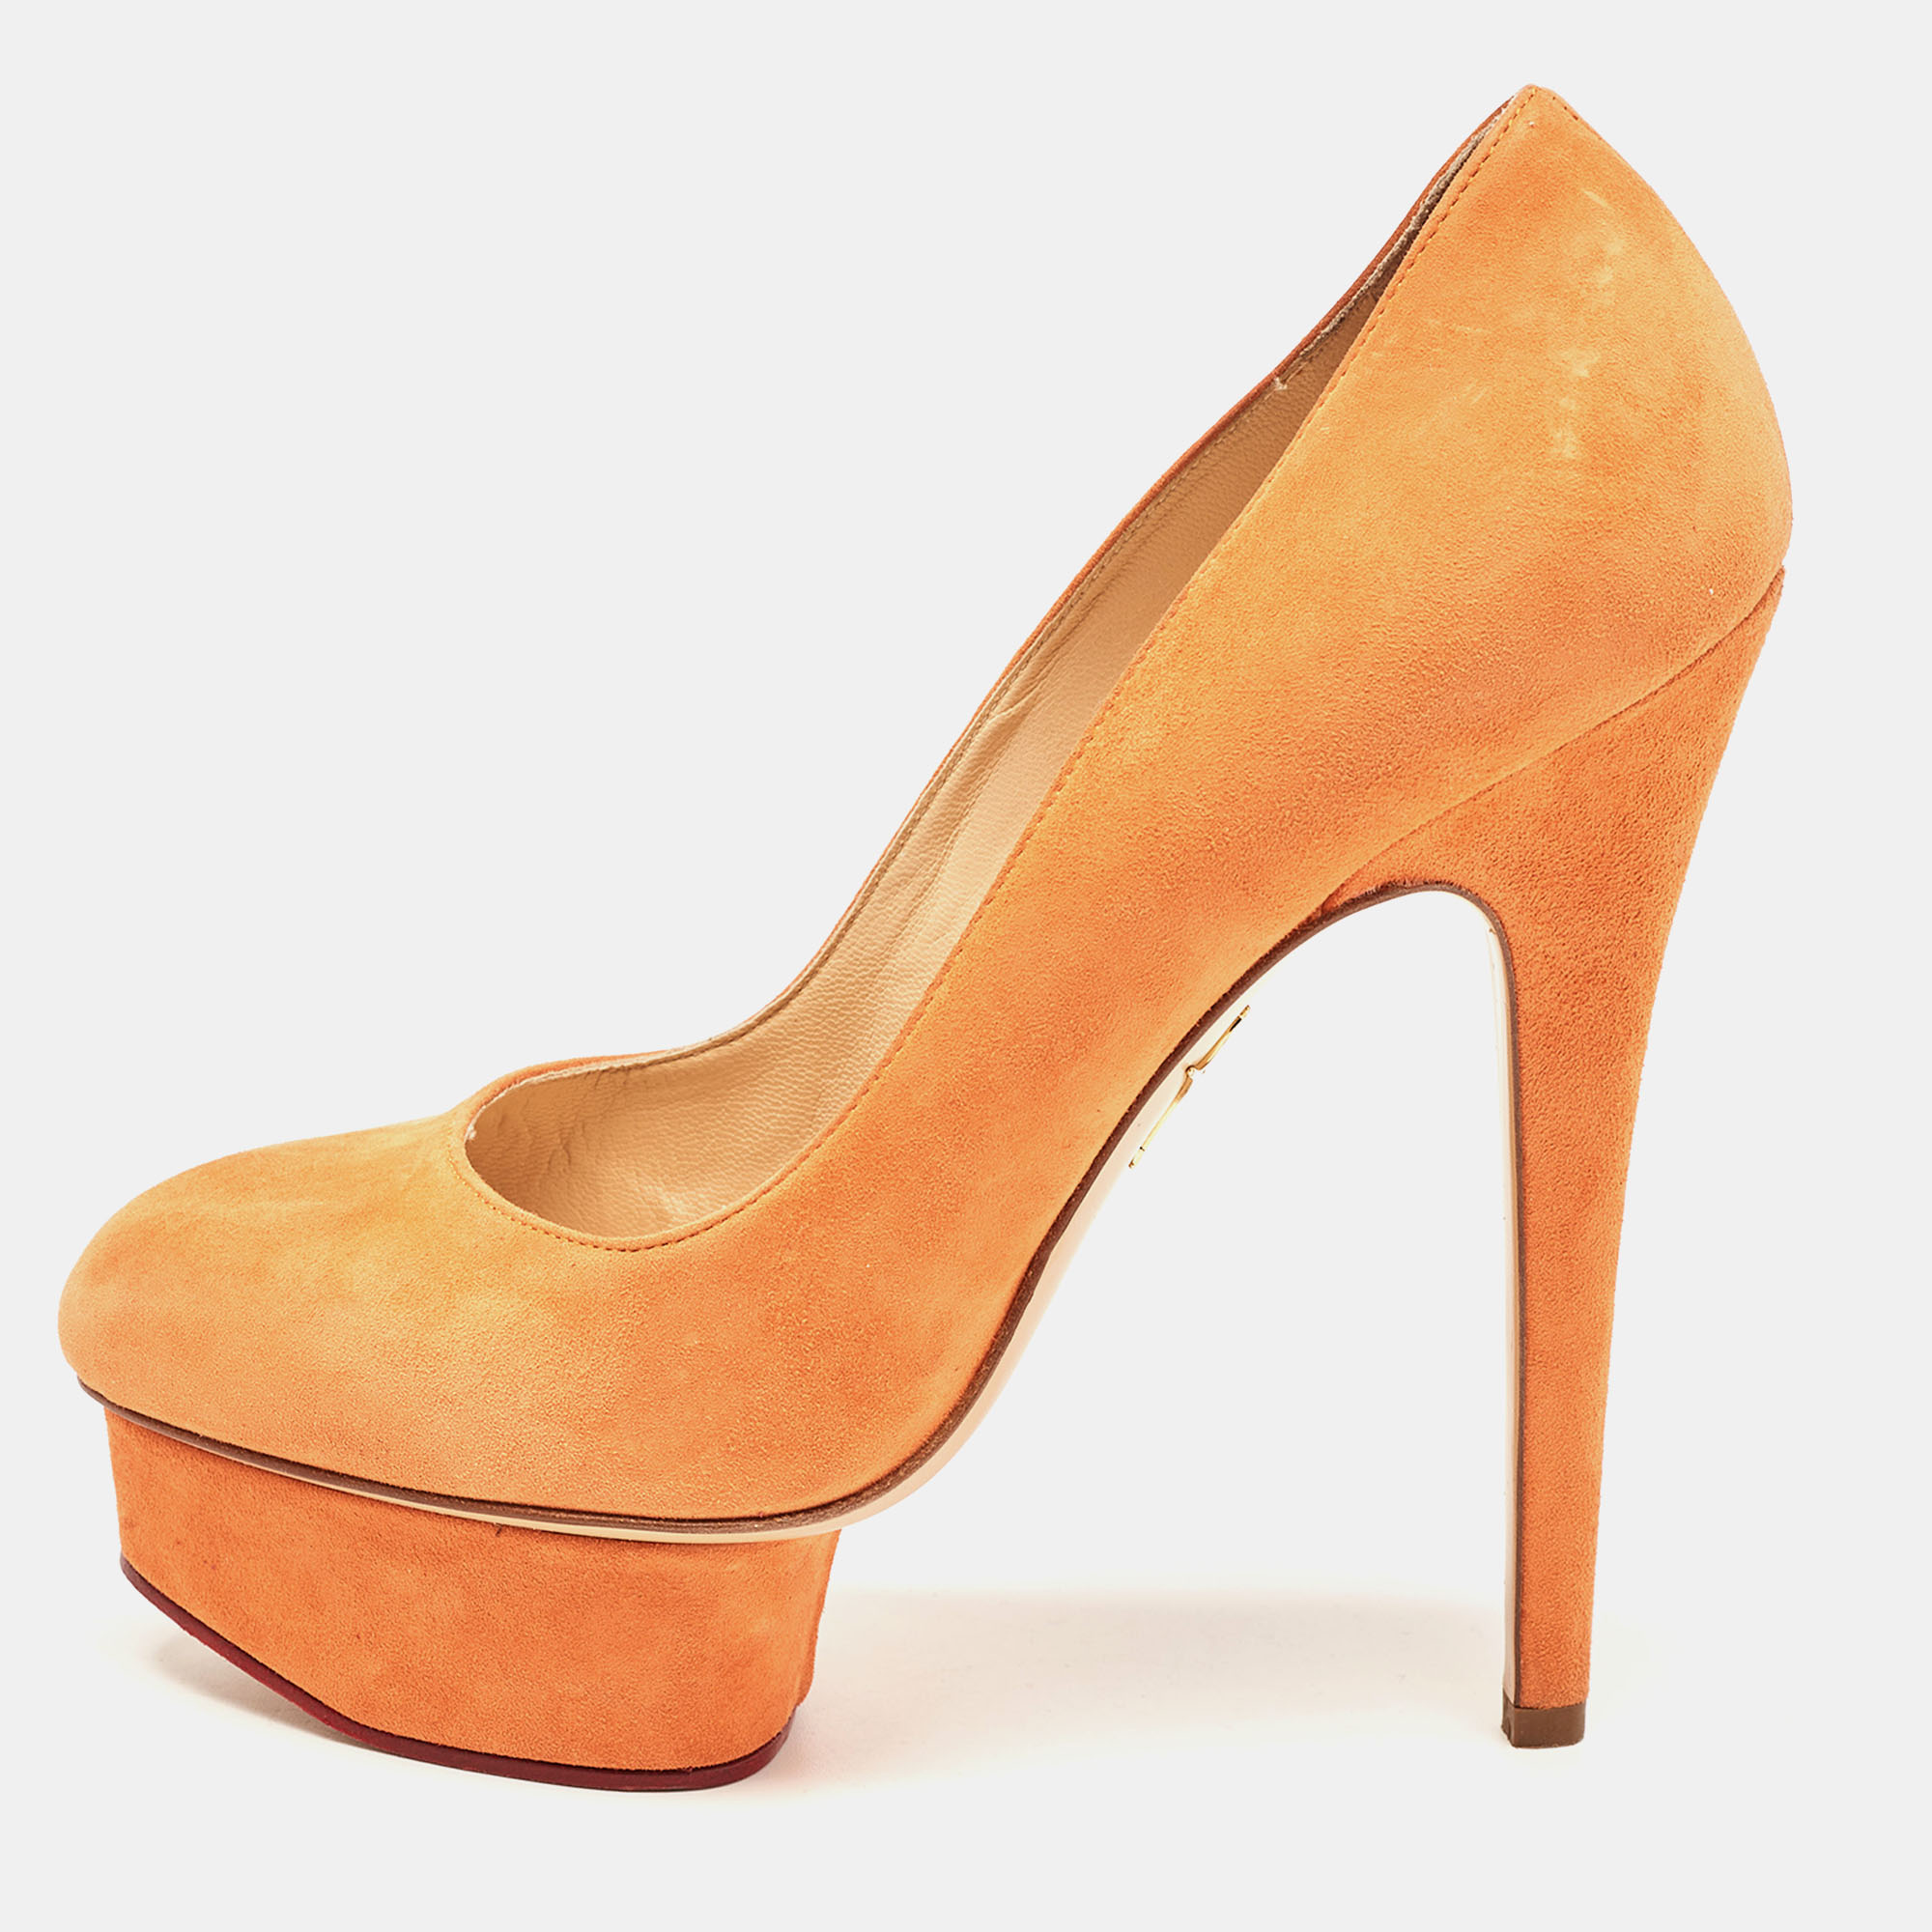 Charlotte olympia orange suede dolly pumps size 37